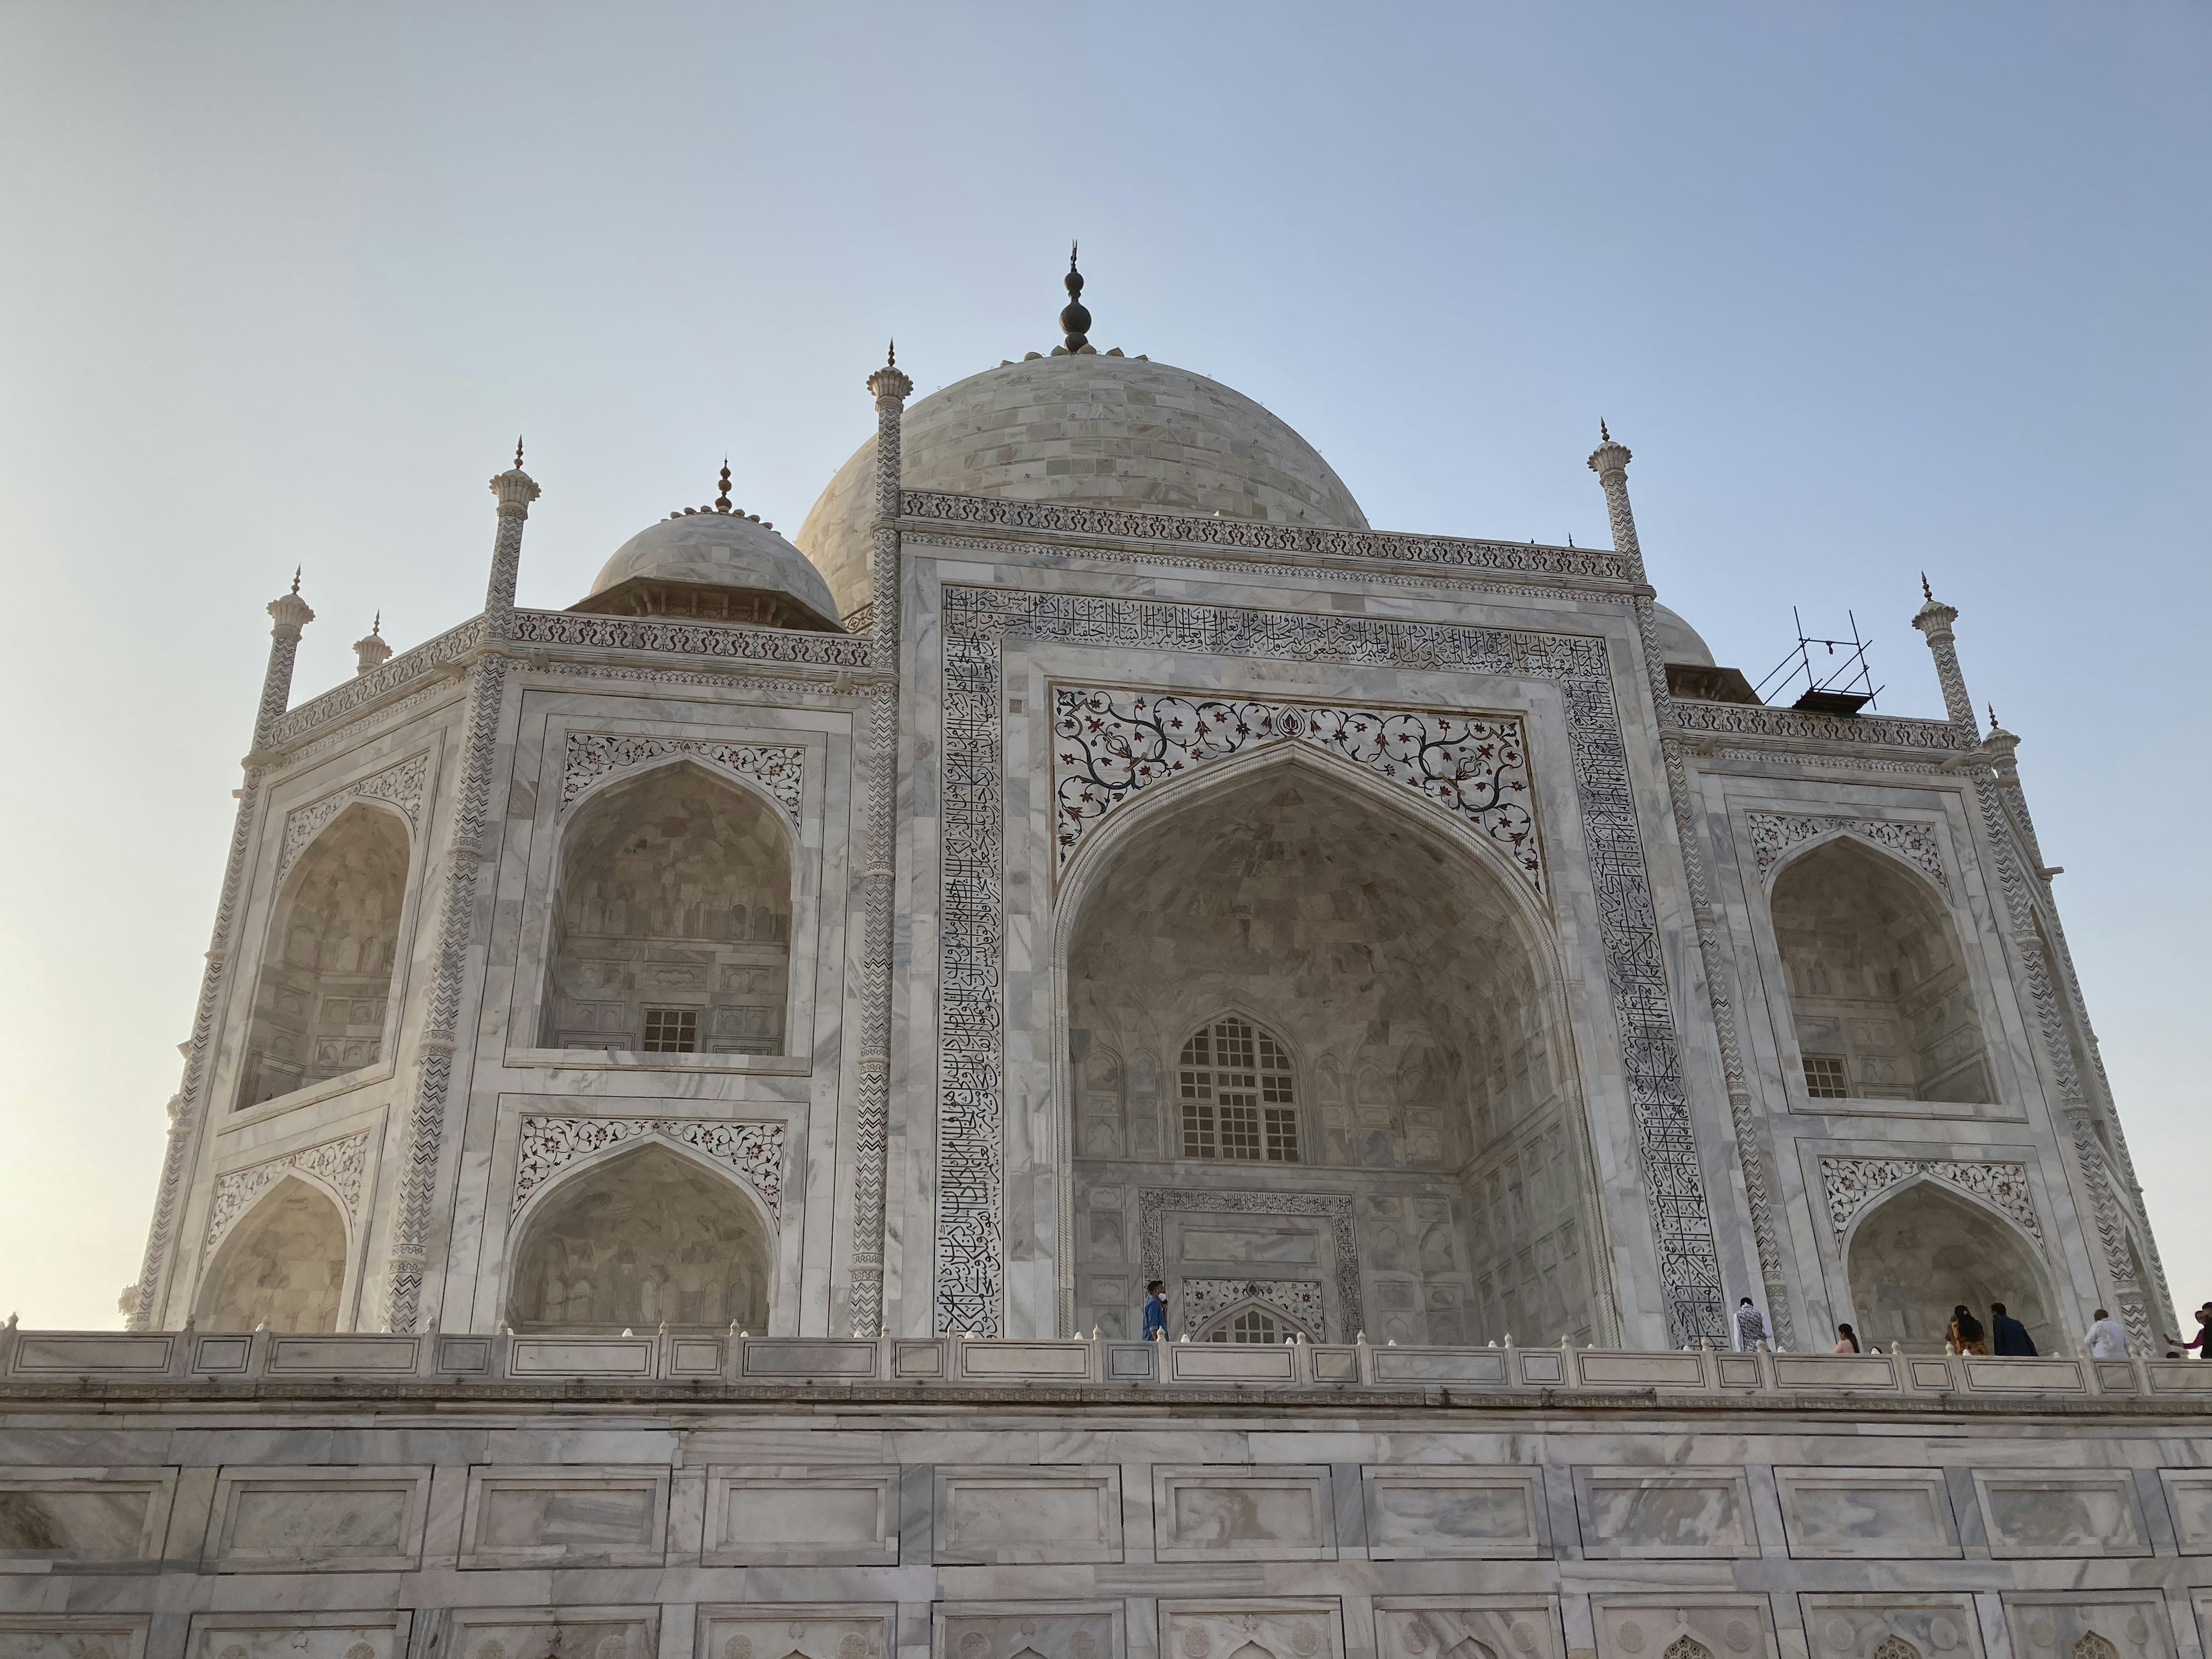 Taj Mahal is one of the seven wonders of the world. It’s built using different types of marble stones brought from various parts of the world.